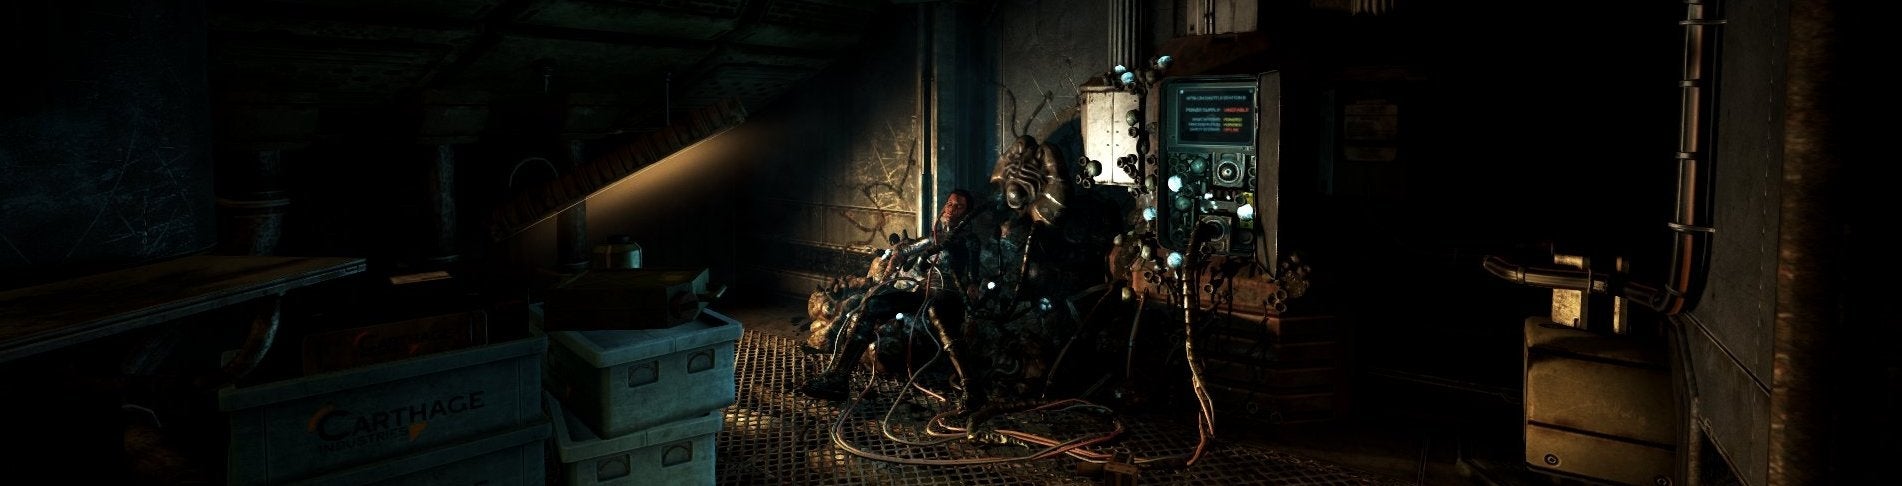 Image for Video: SOMA PC gameplay and impressions - It's Amnesia in space, or is it?